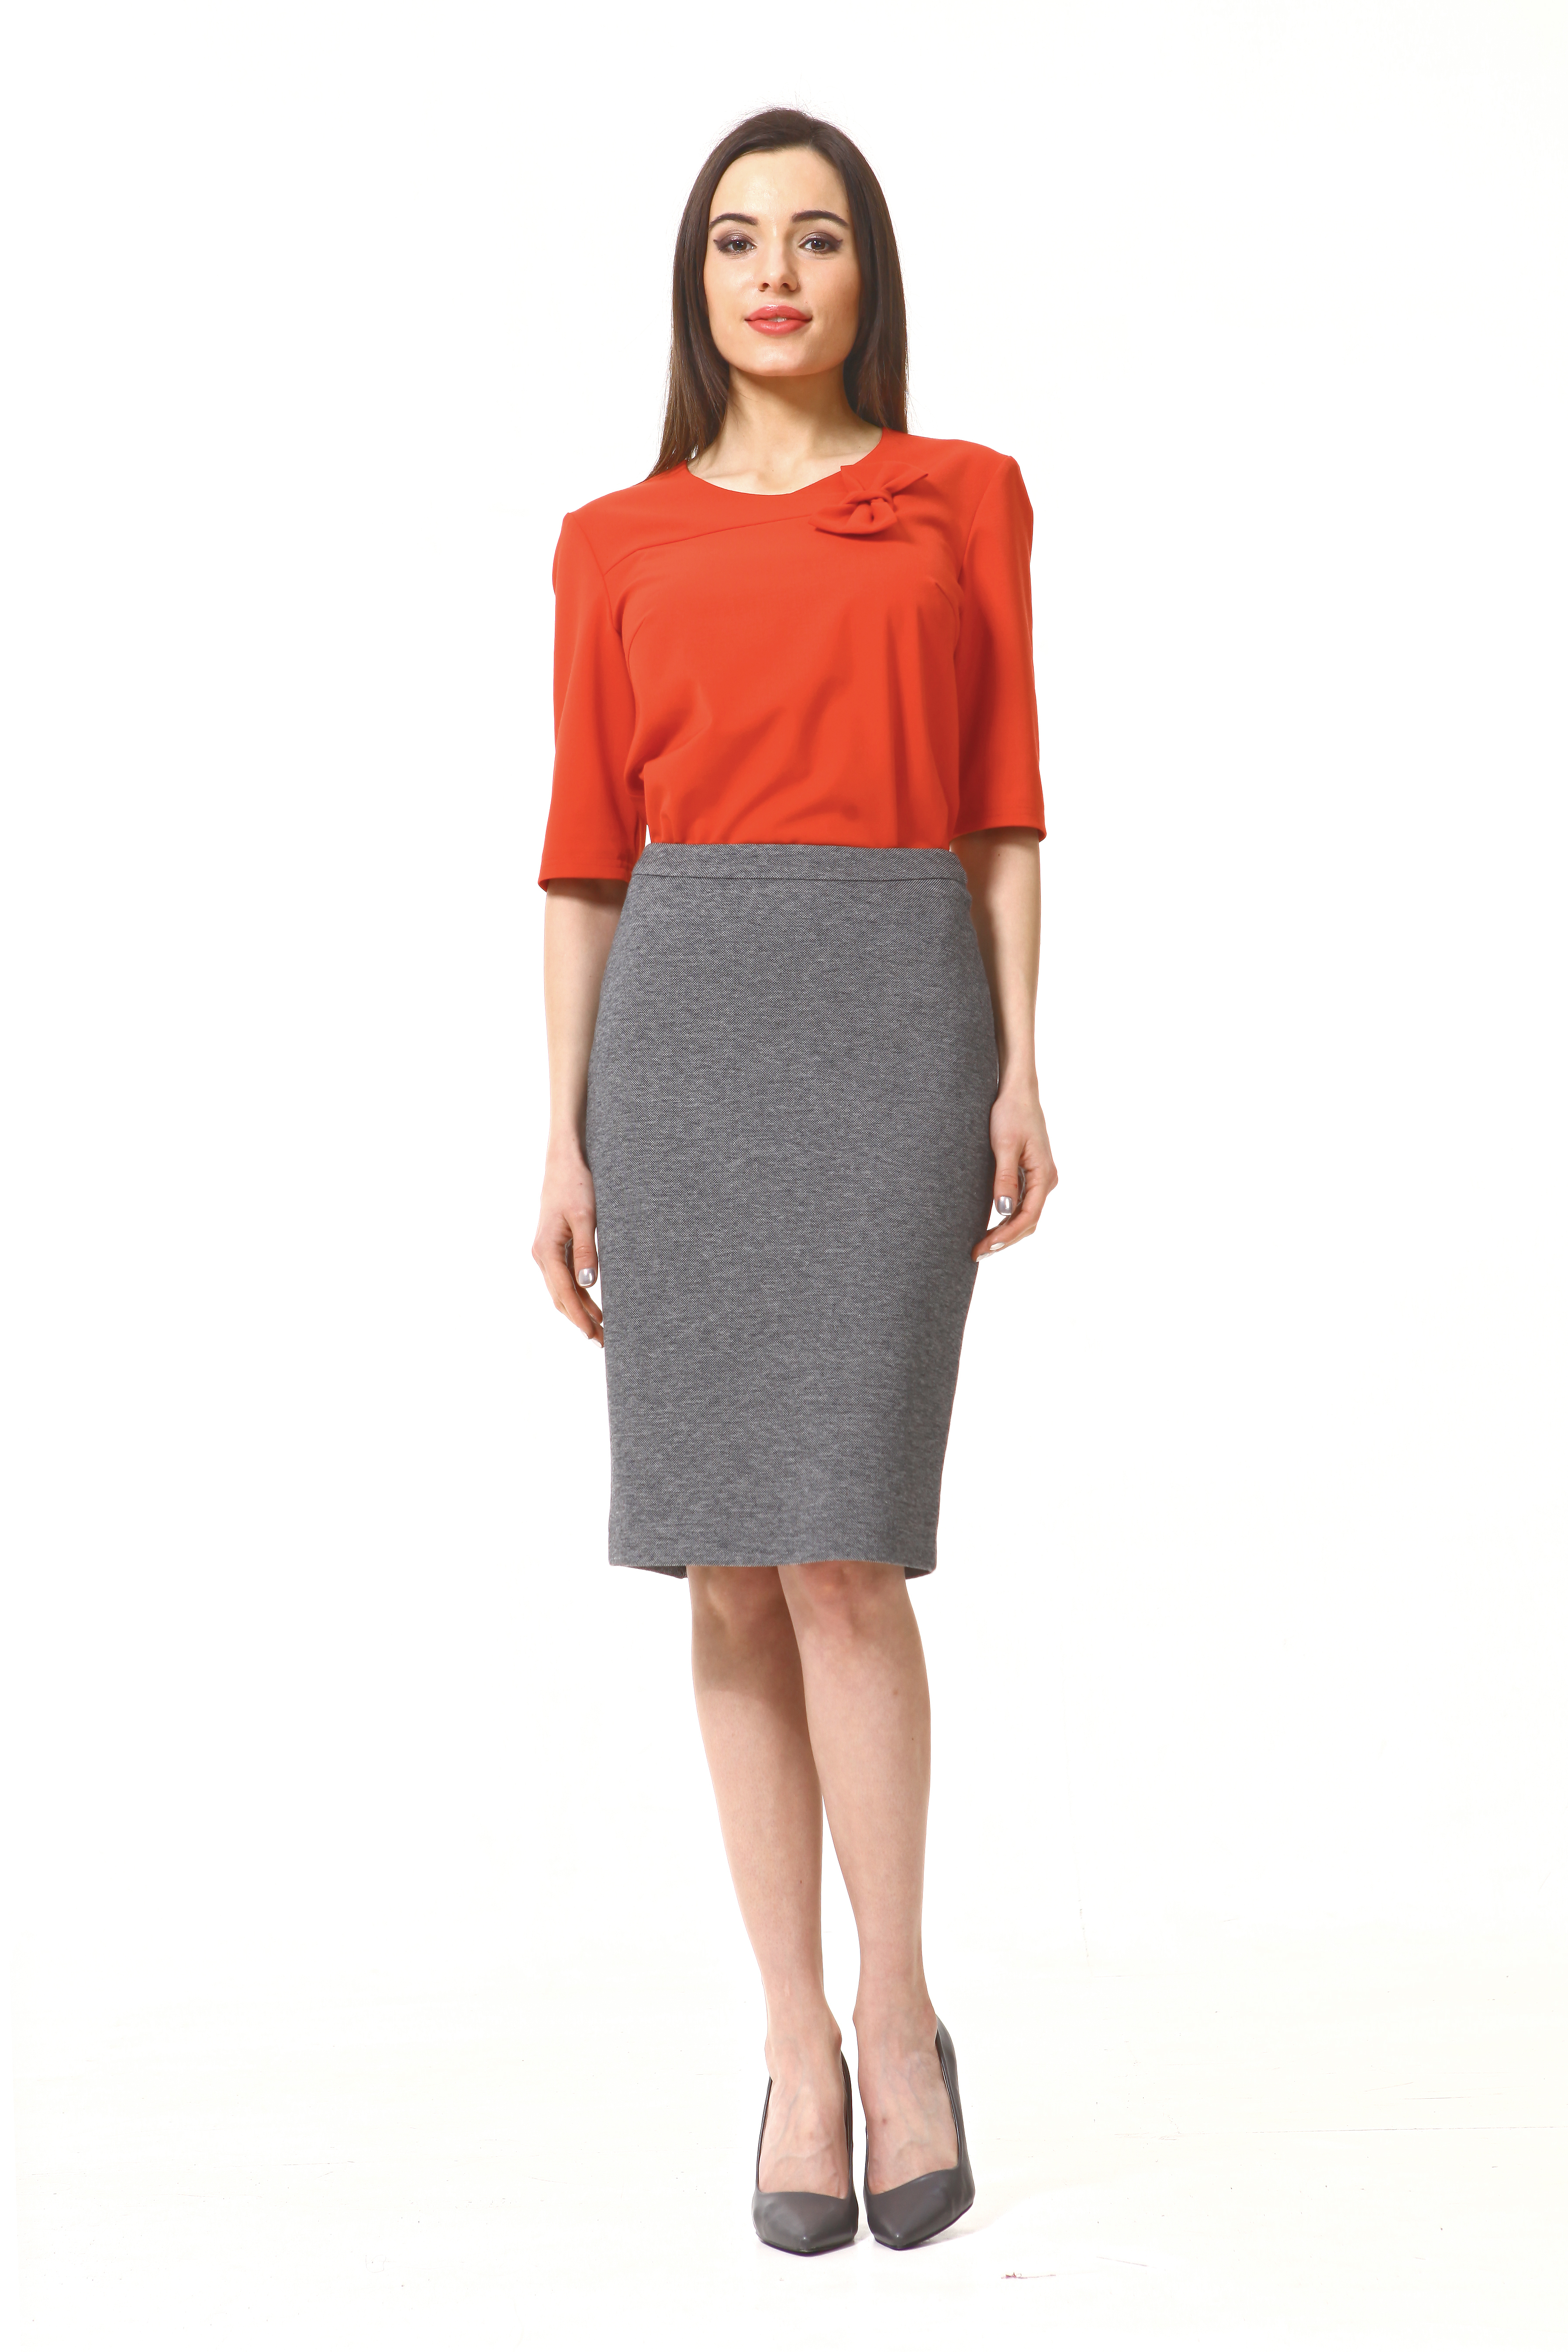 woman wearing a red shirt and pencil skirt, how to dress over 40